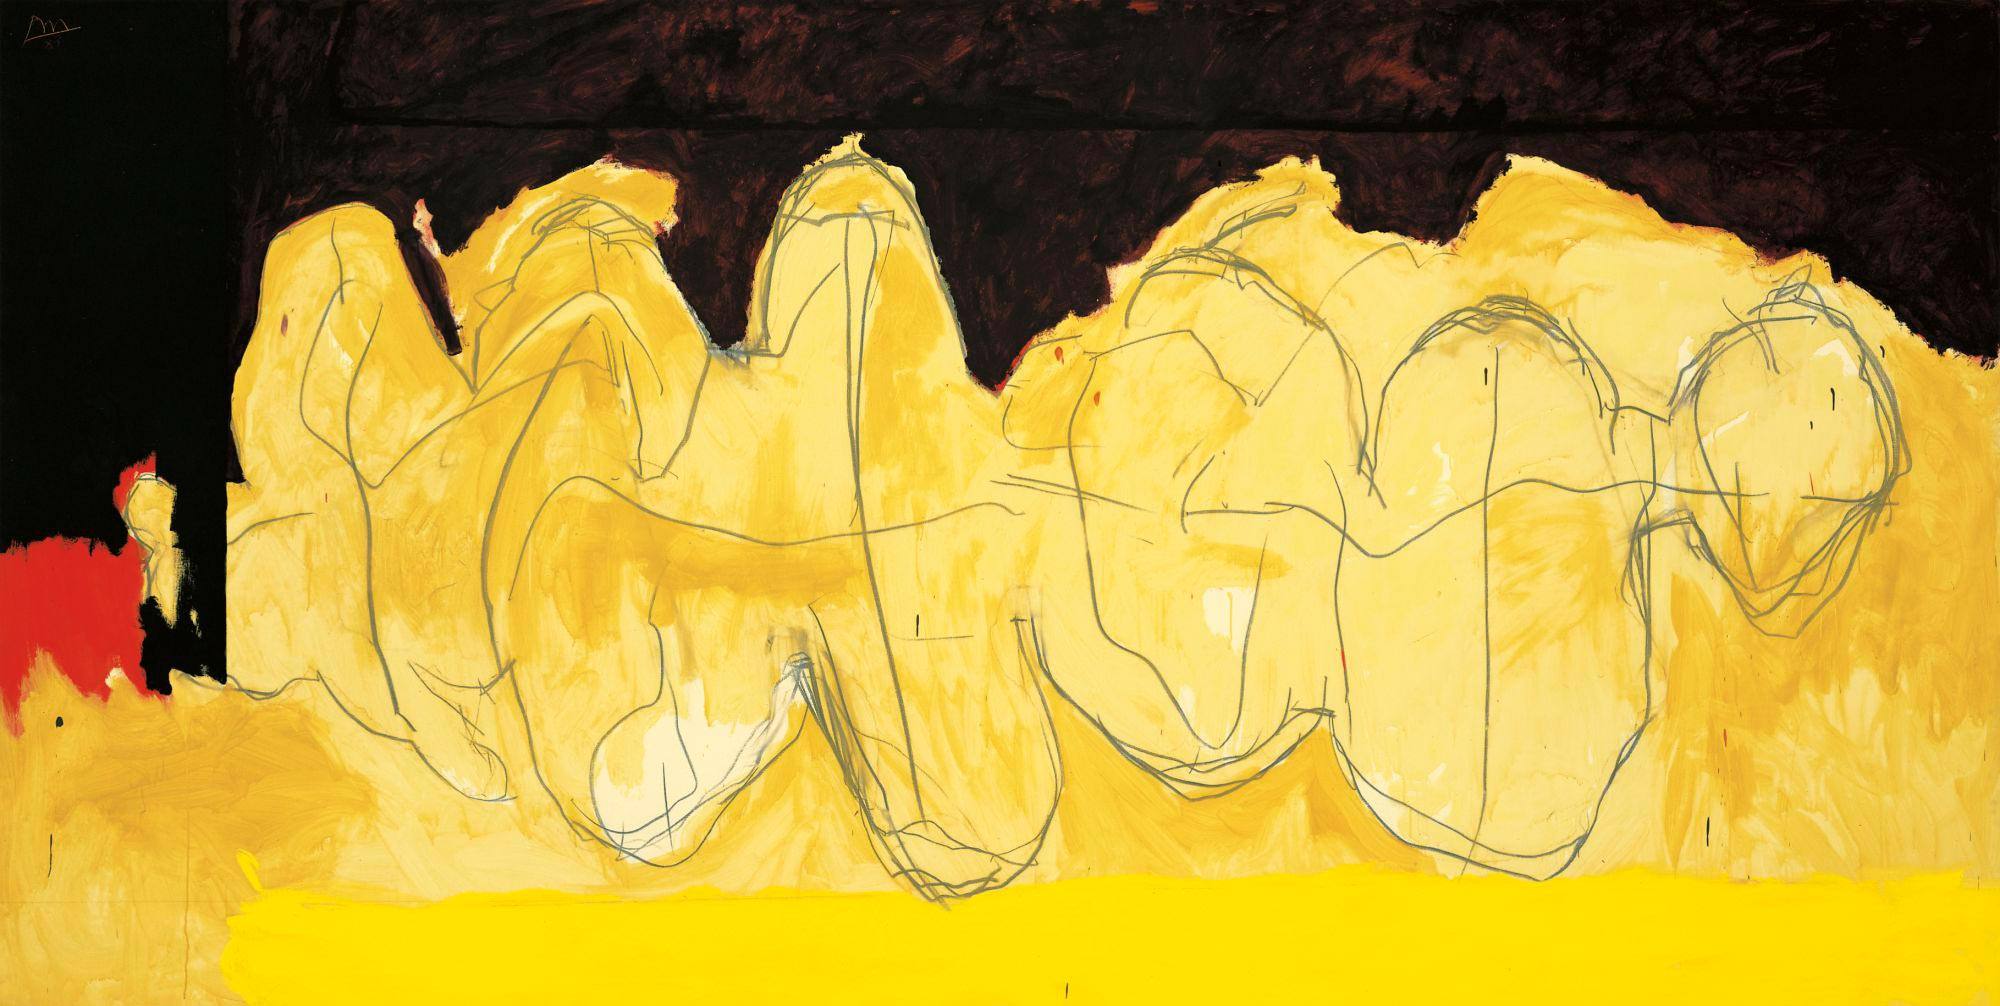 The Hollow Men, 1983. Acrylic, charcoal, and graphite on canvas, 88 x 176 inches (223.5 x 447 cm)